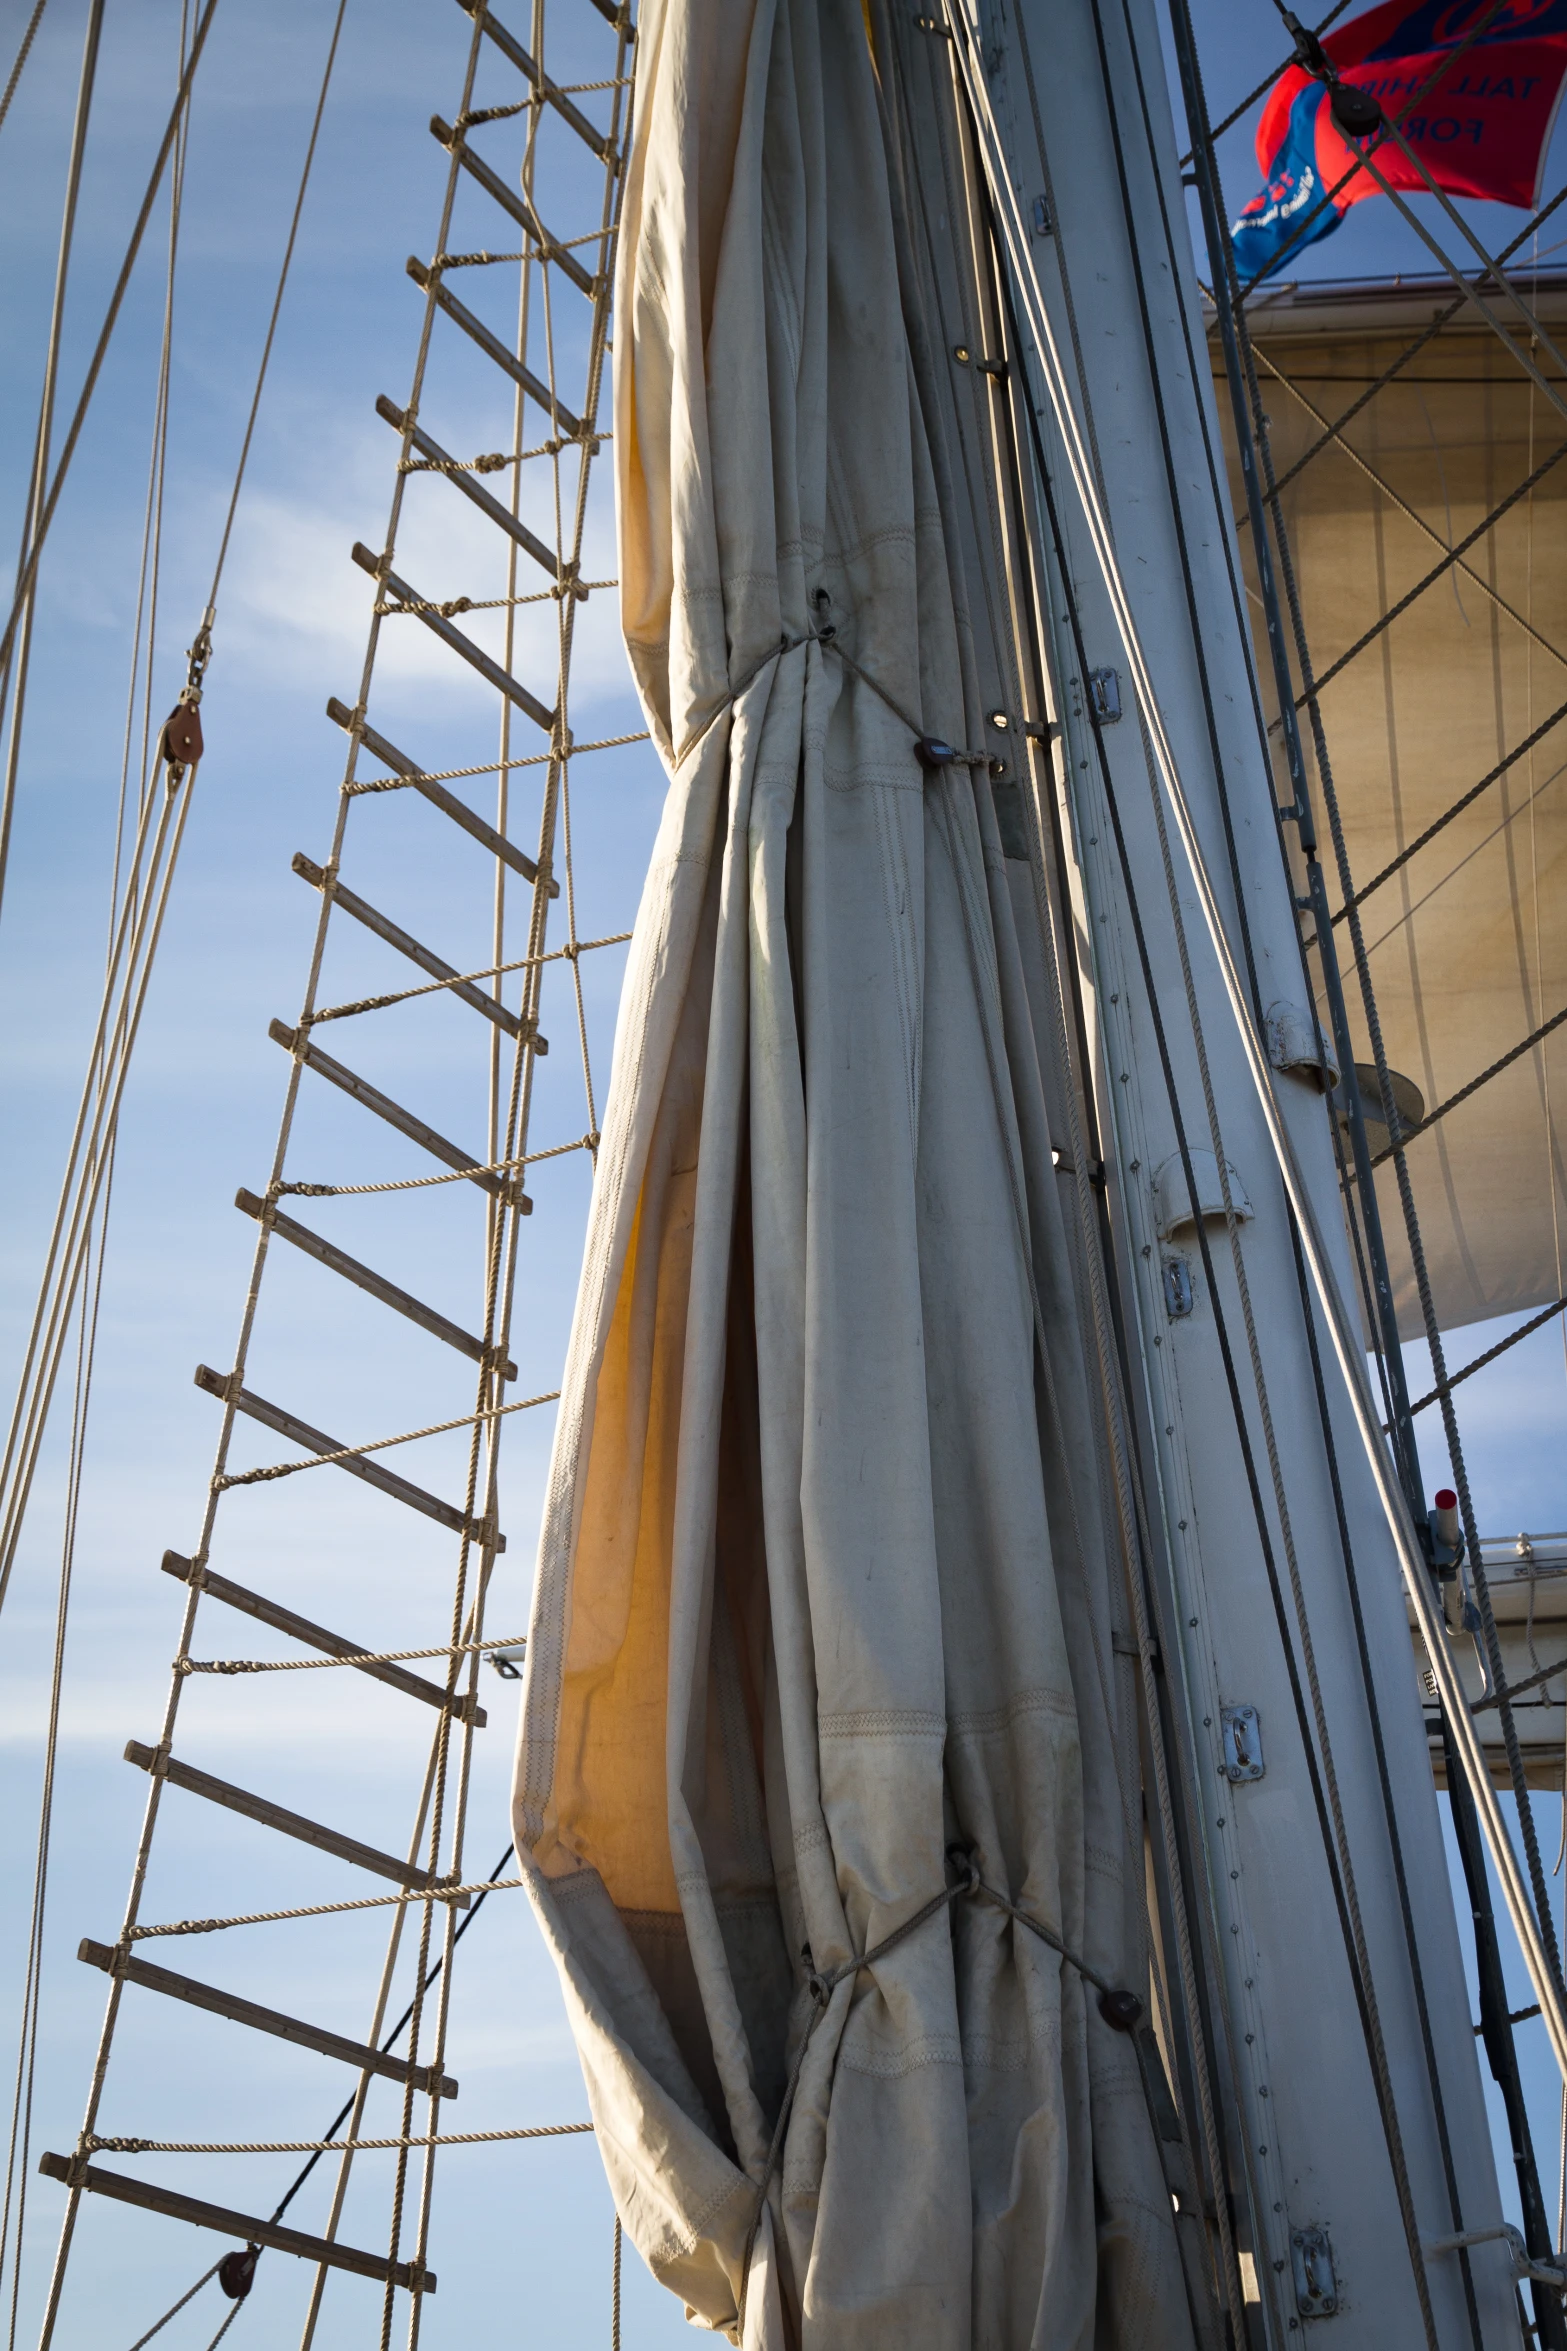 an up close image of some ropes and the sails